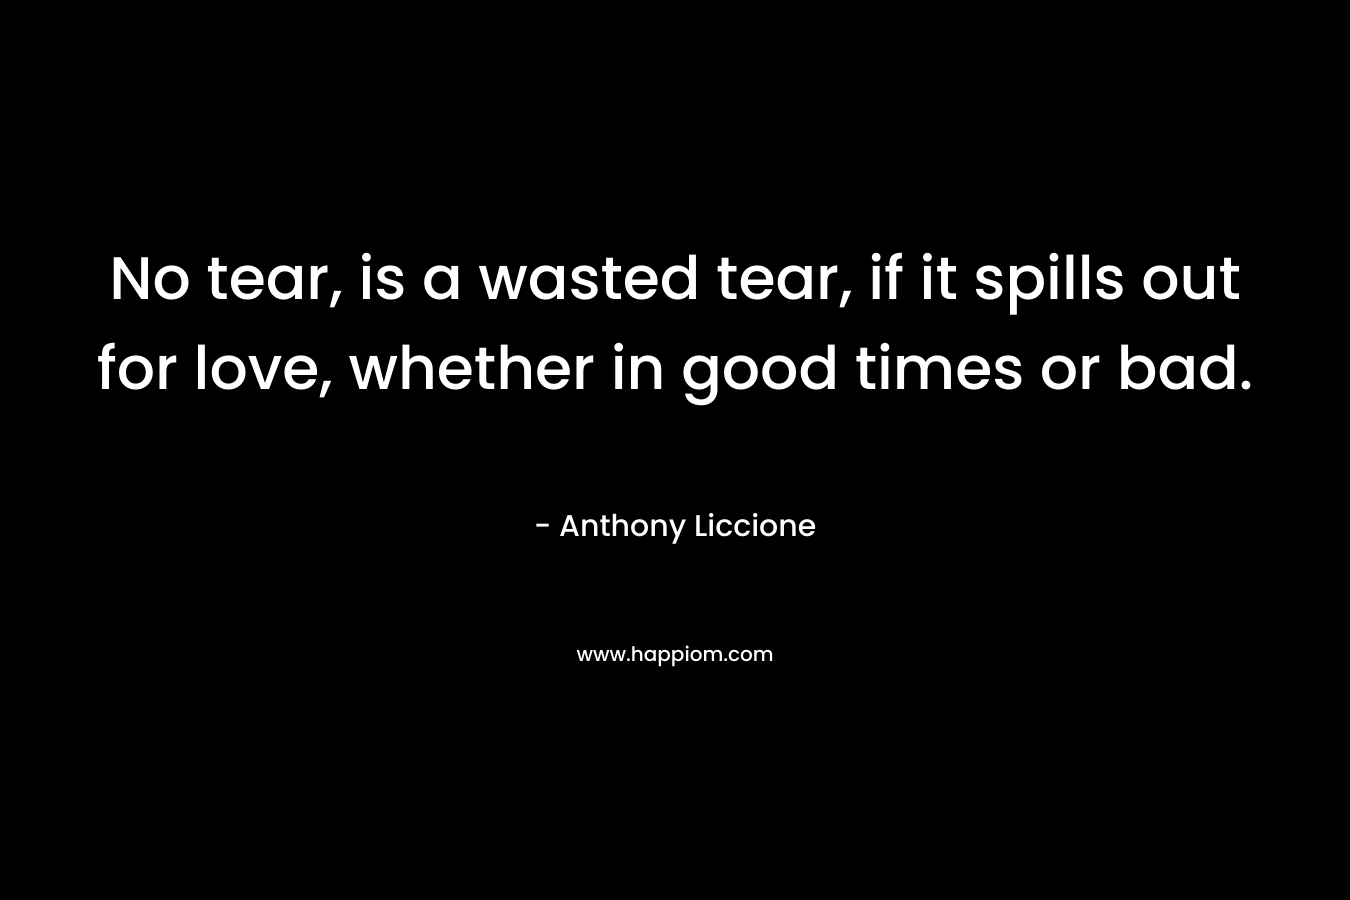 No tear, is a wasted tear, if it spills out for love, whether in good times or bad. – Anthony Liccione